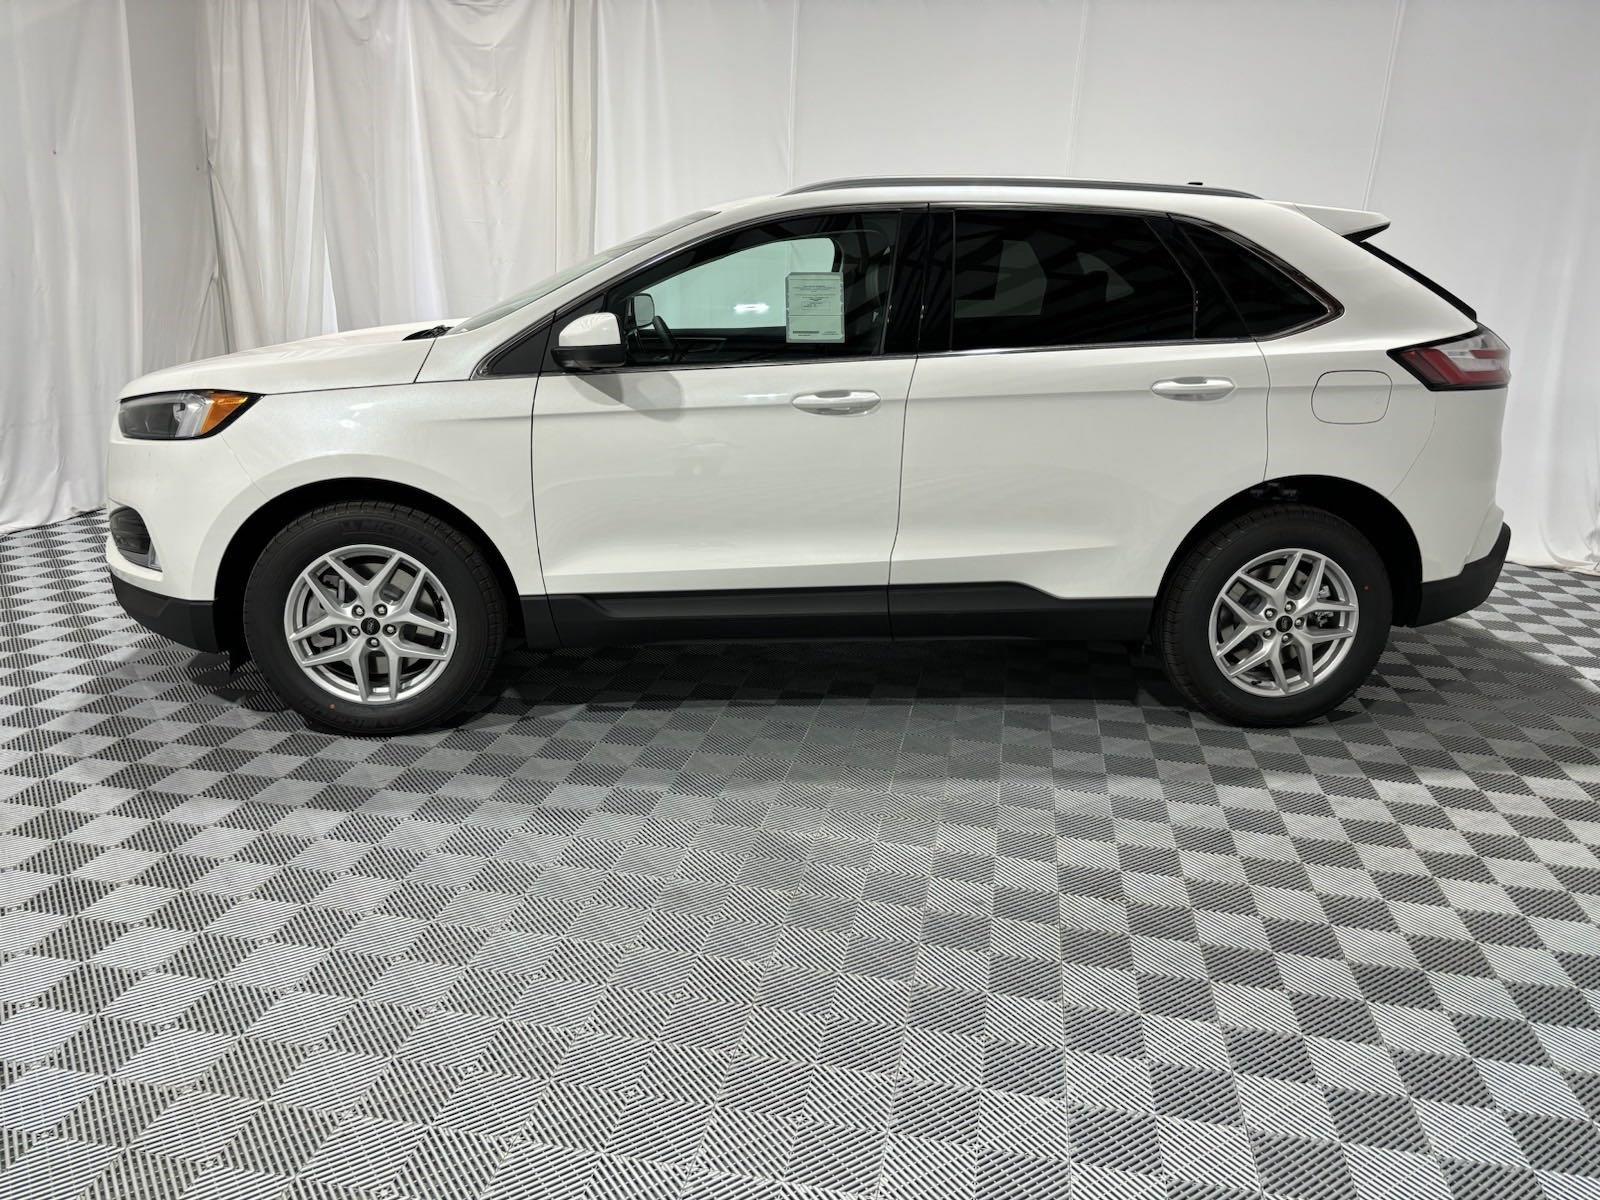 New 2024 Ford Edge SEL SUV for sale in St Joseph MO